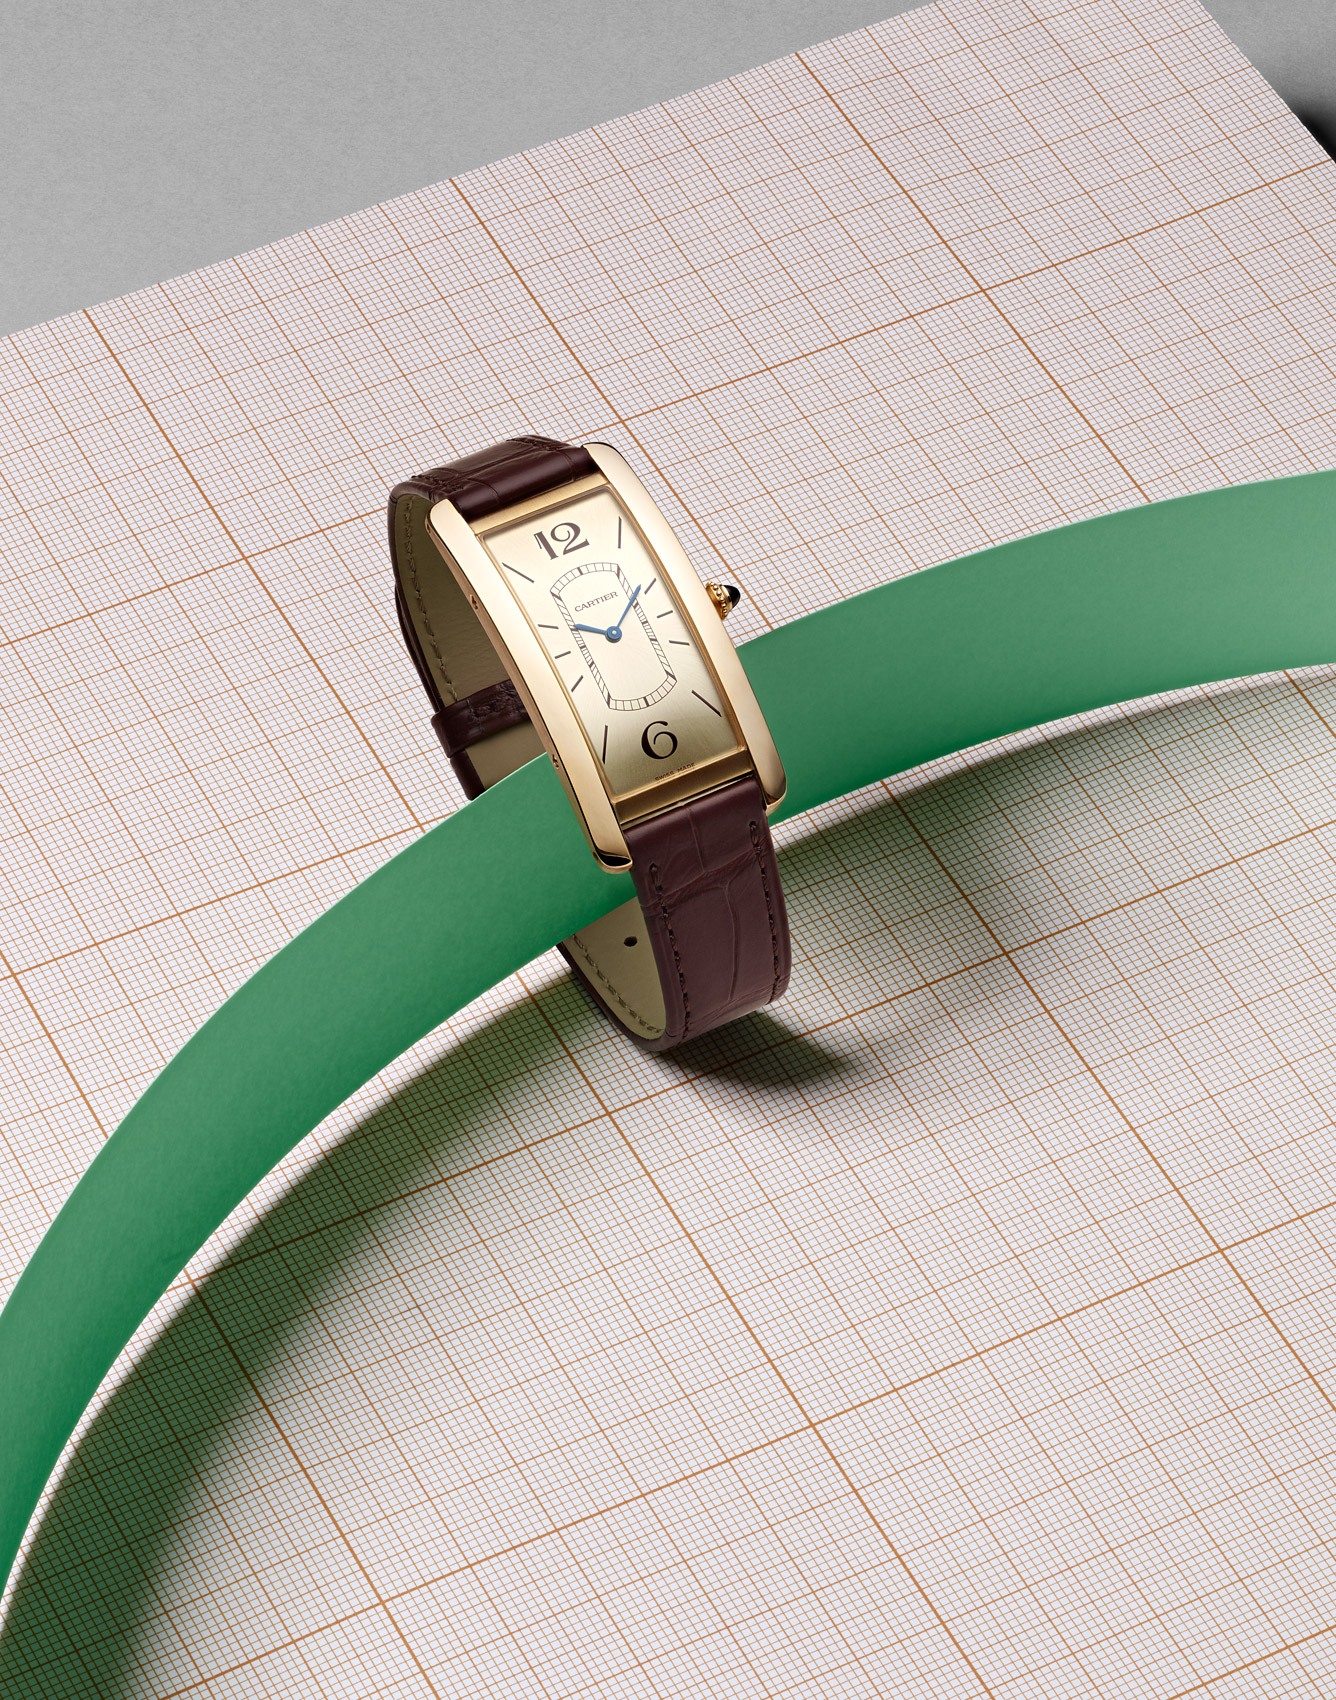 Cartier watch photography by Alexander Kent London based still life and product photographer.